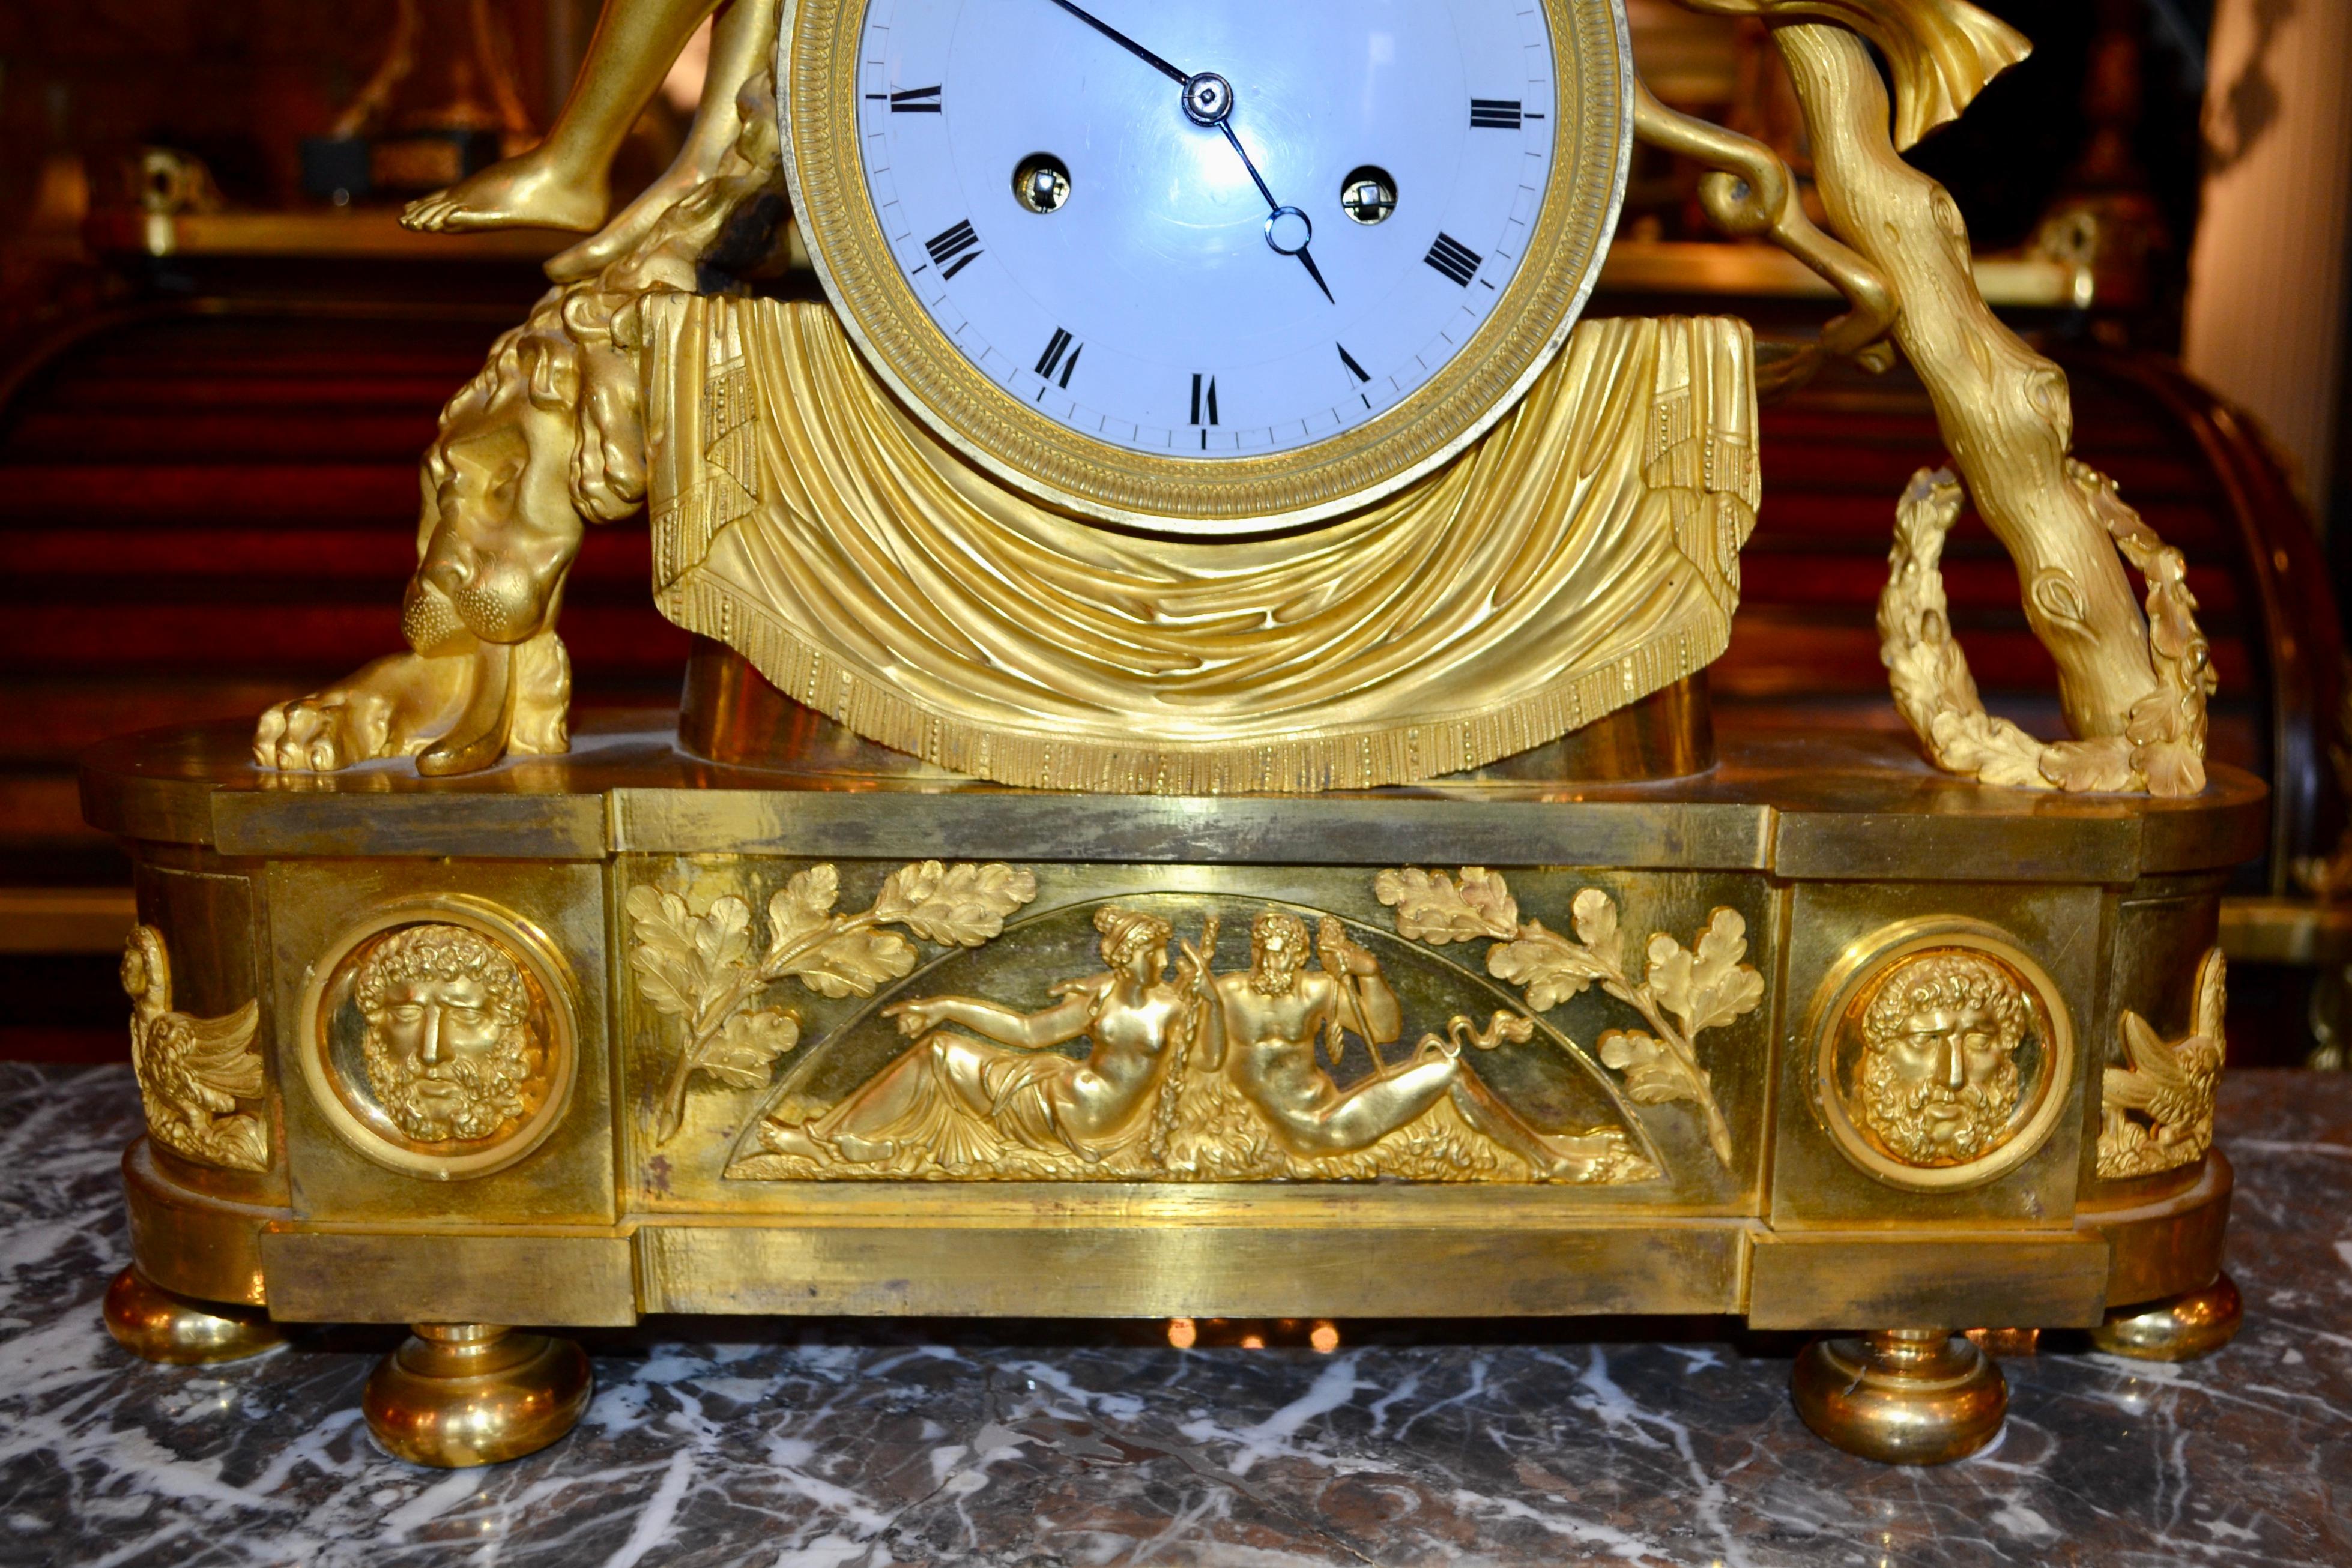  French Empire Gilt Bronze Clock Depicting the Lydian Queen Omphale For Sale 9